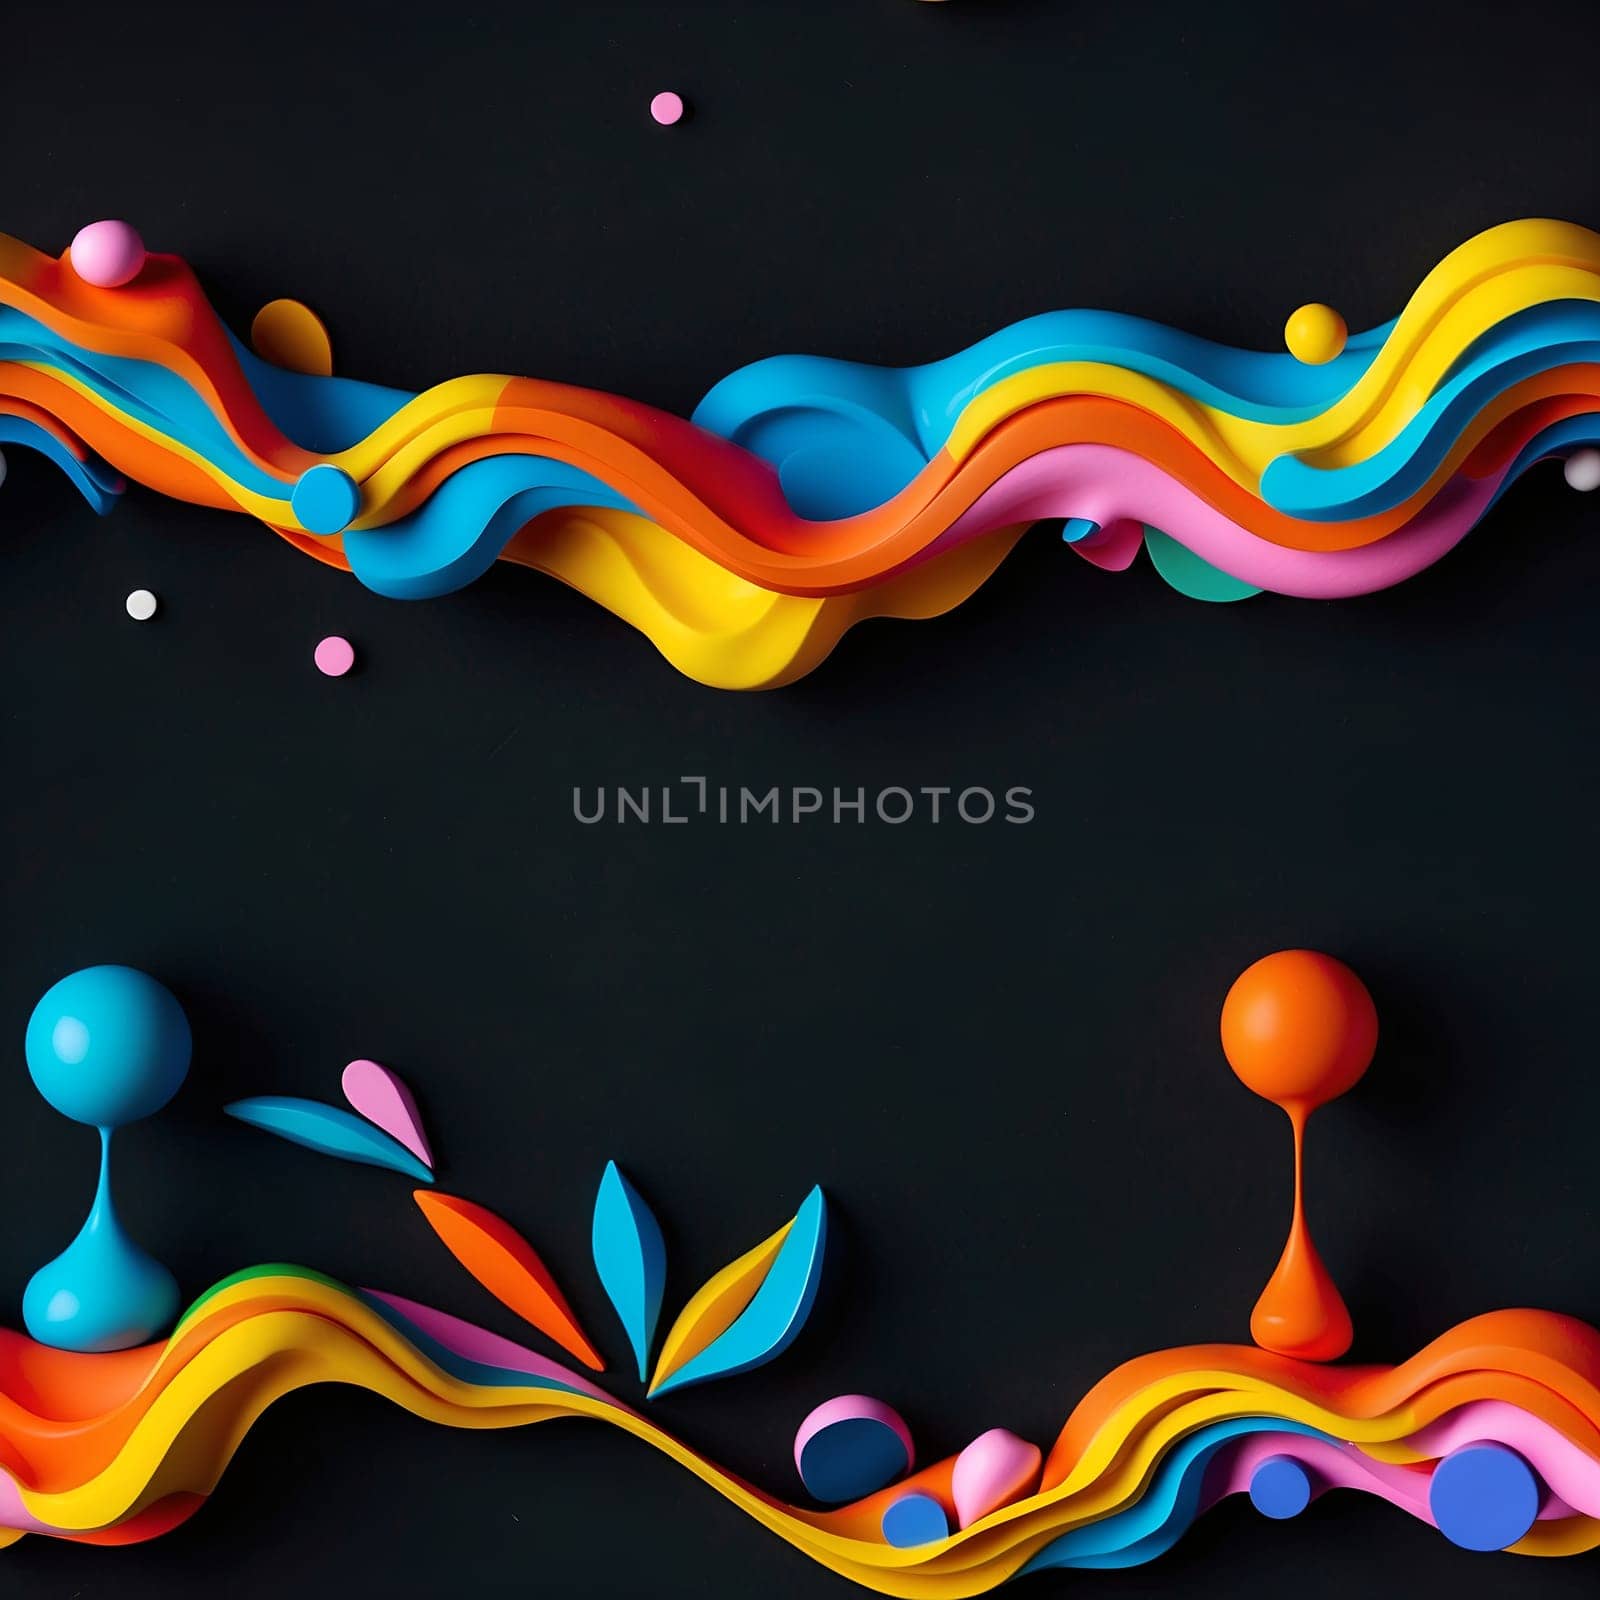 A vibrant display of paper art on a black background, showcasing a range of vivid colors and intricate designs.